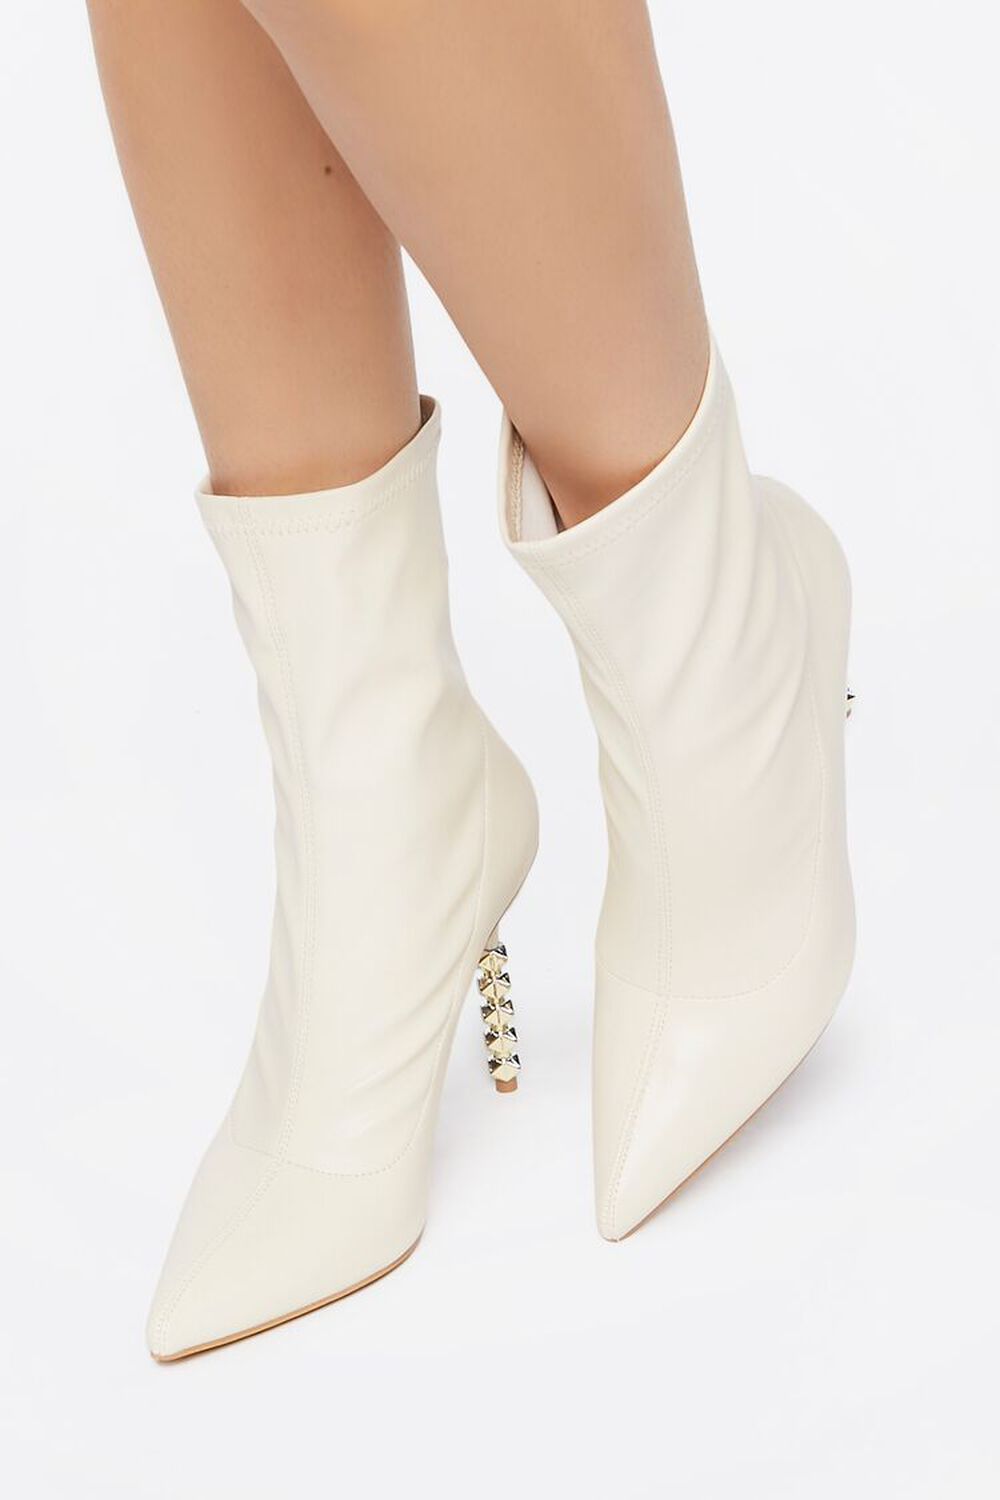 WHITE Faux Leather Studded Heel Booties, image 1